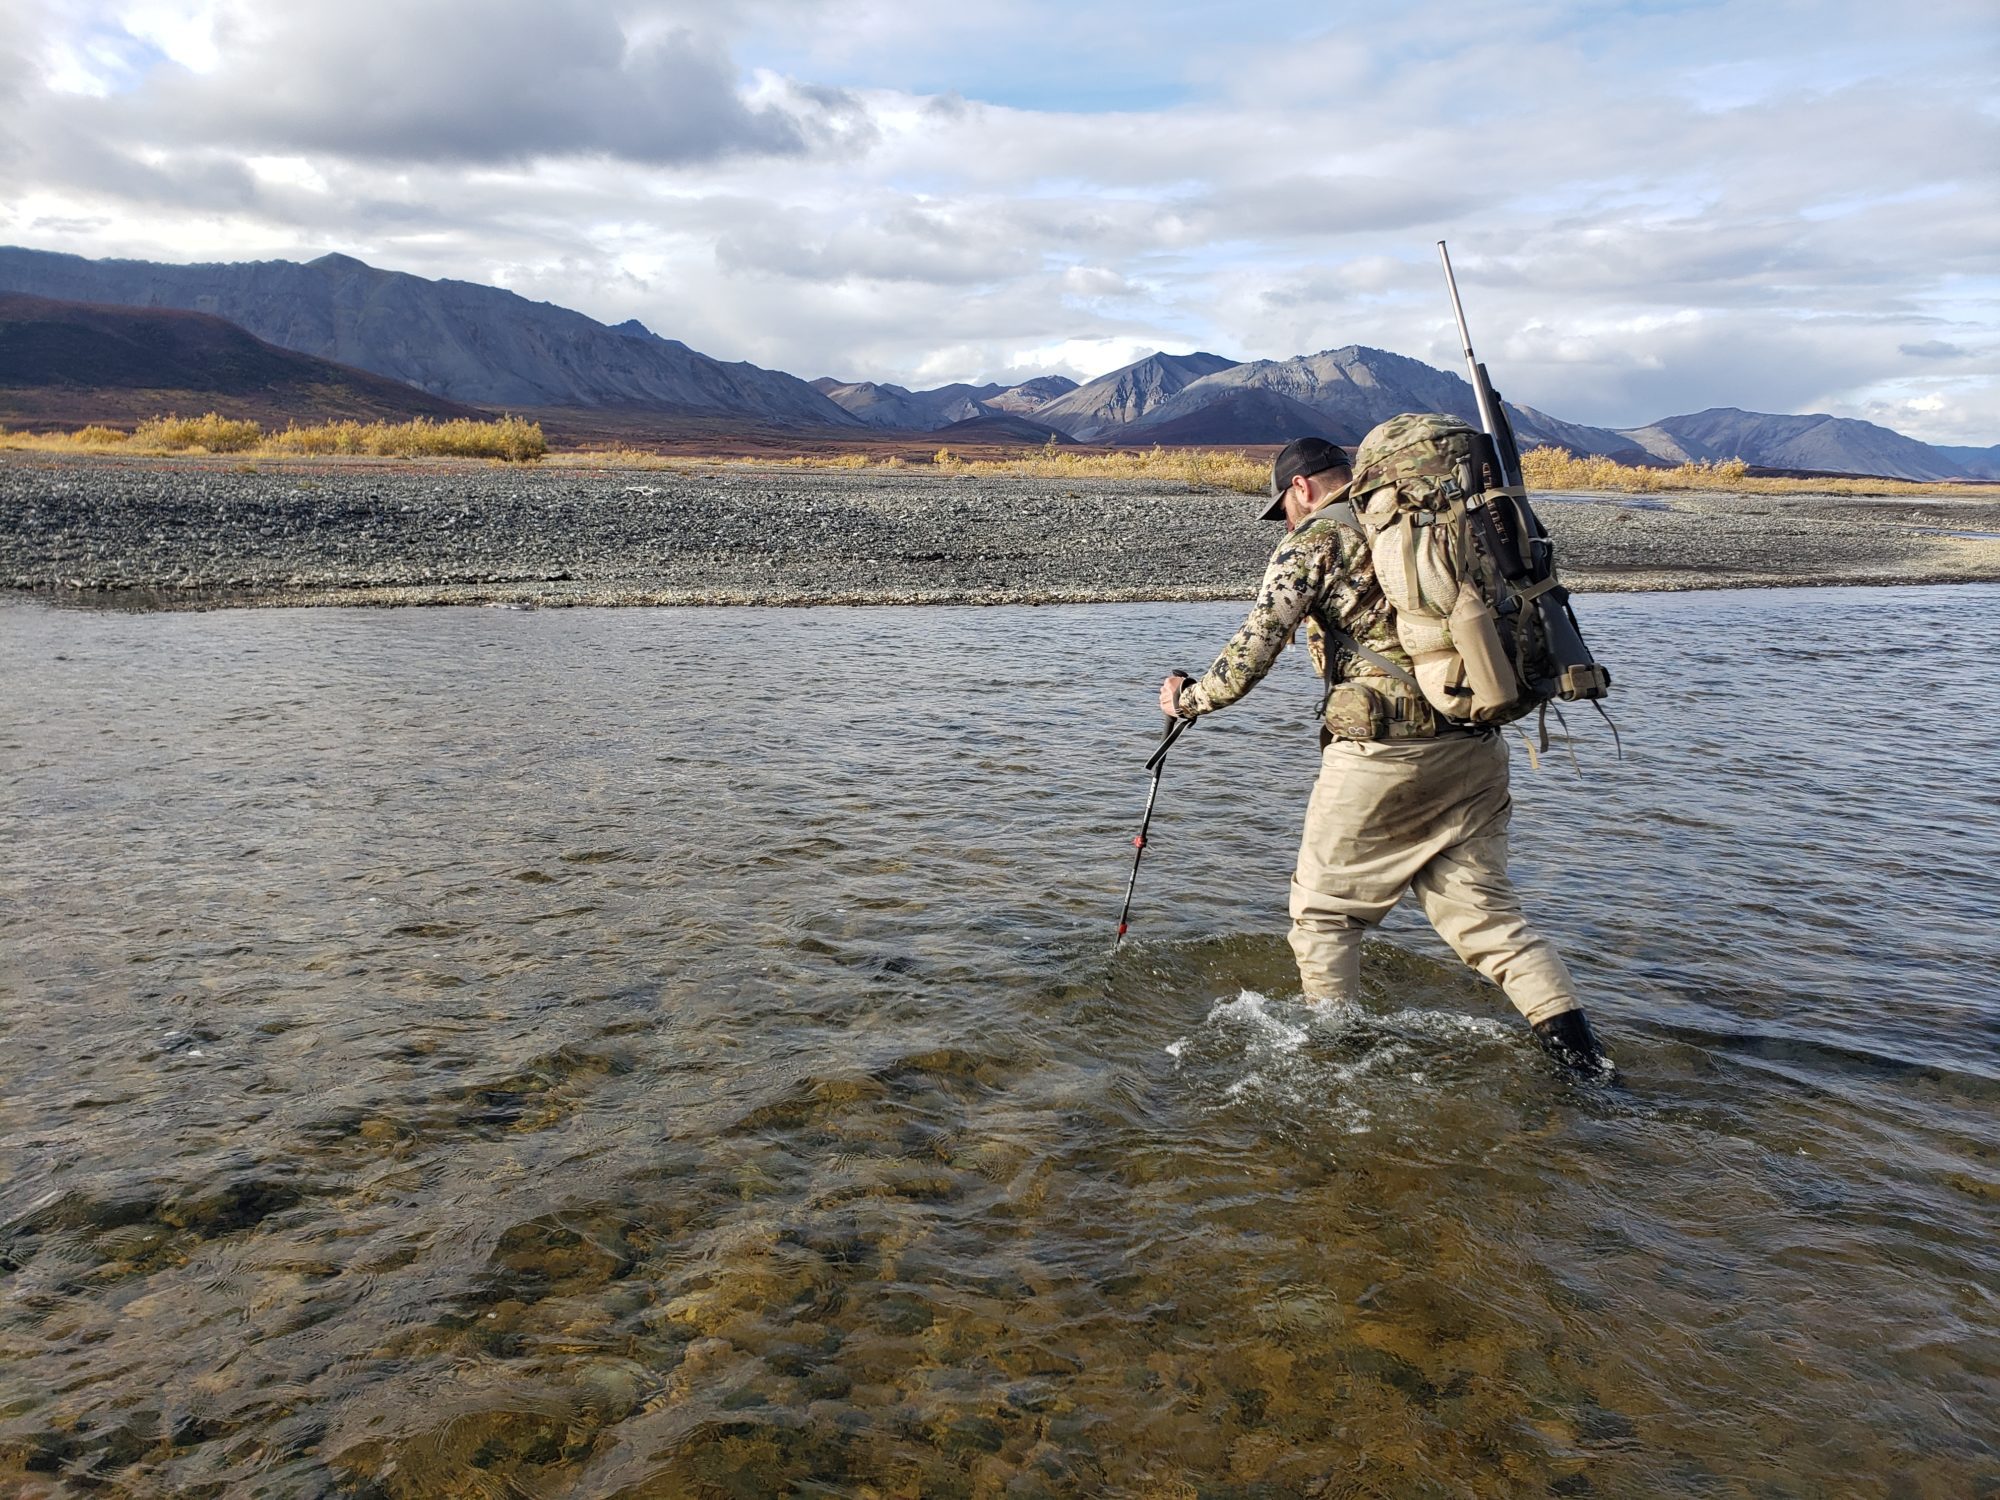 Crossing rivers in Alaska while you're on a hunt is super common.